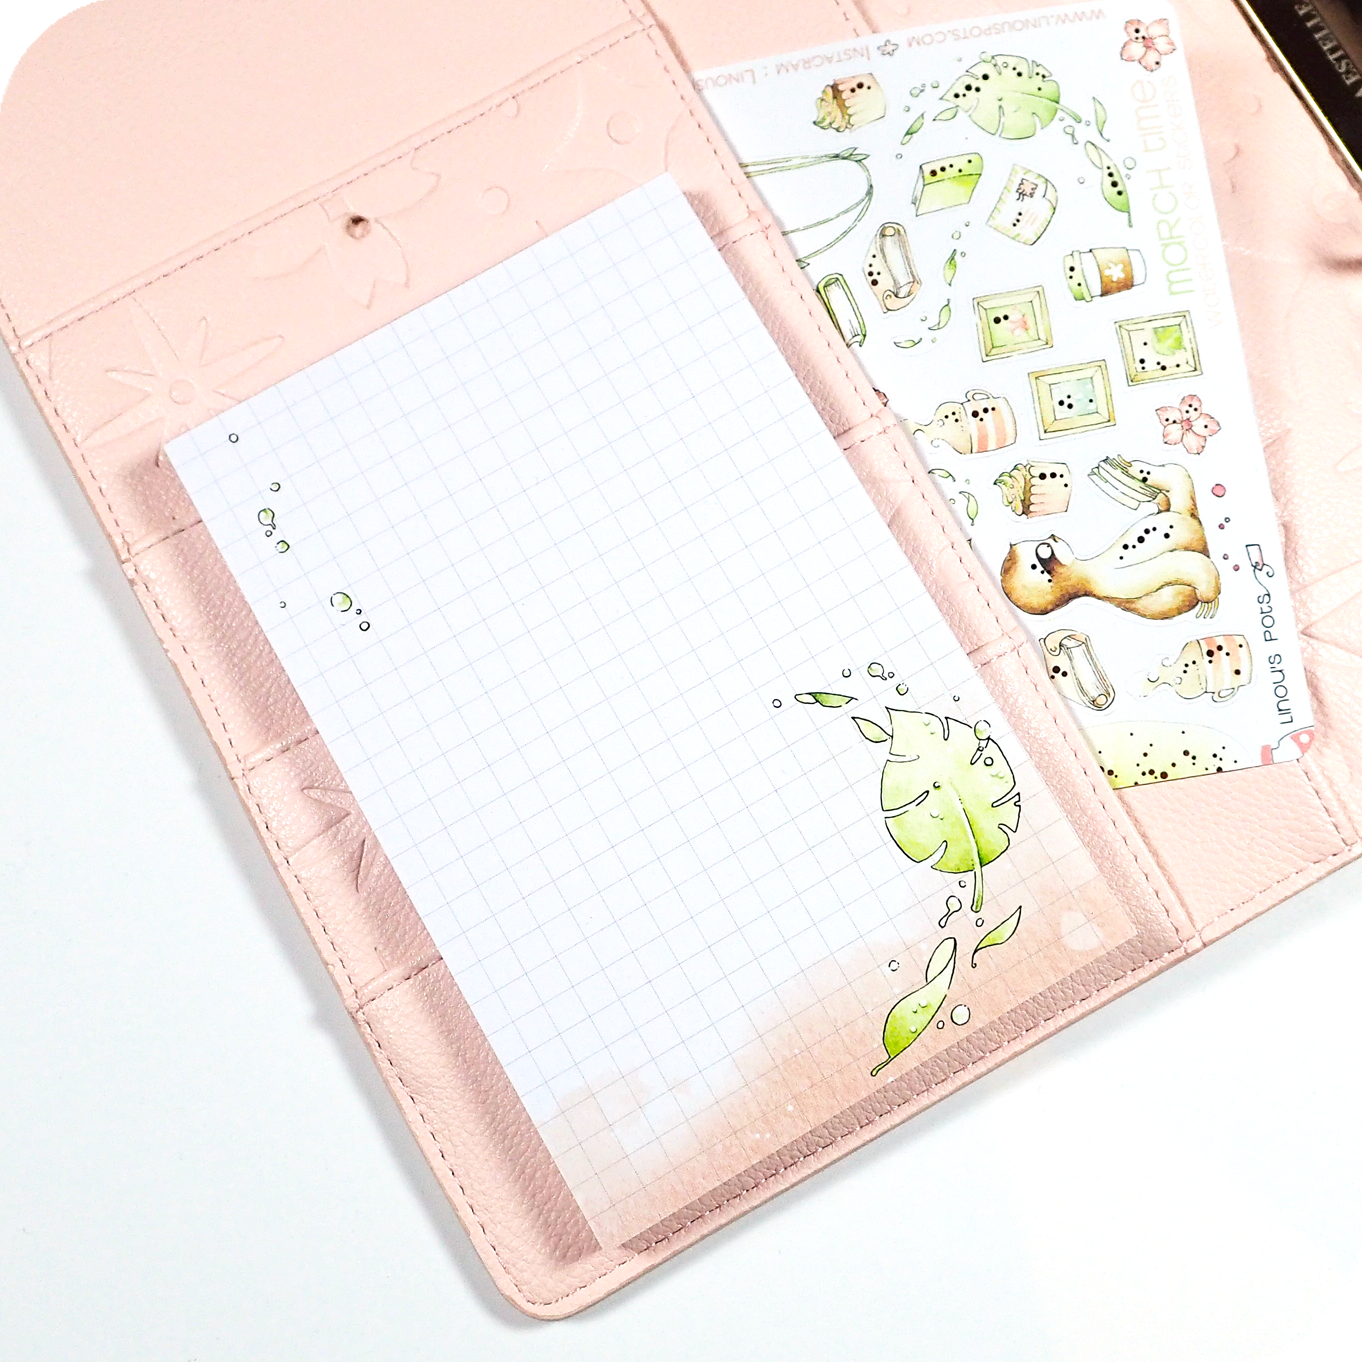 Four watercolored grid notepads pocket sized